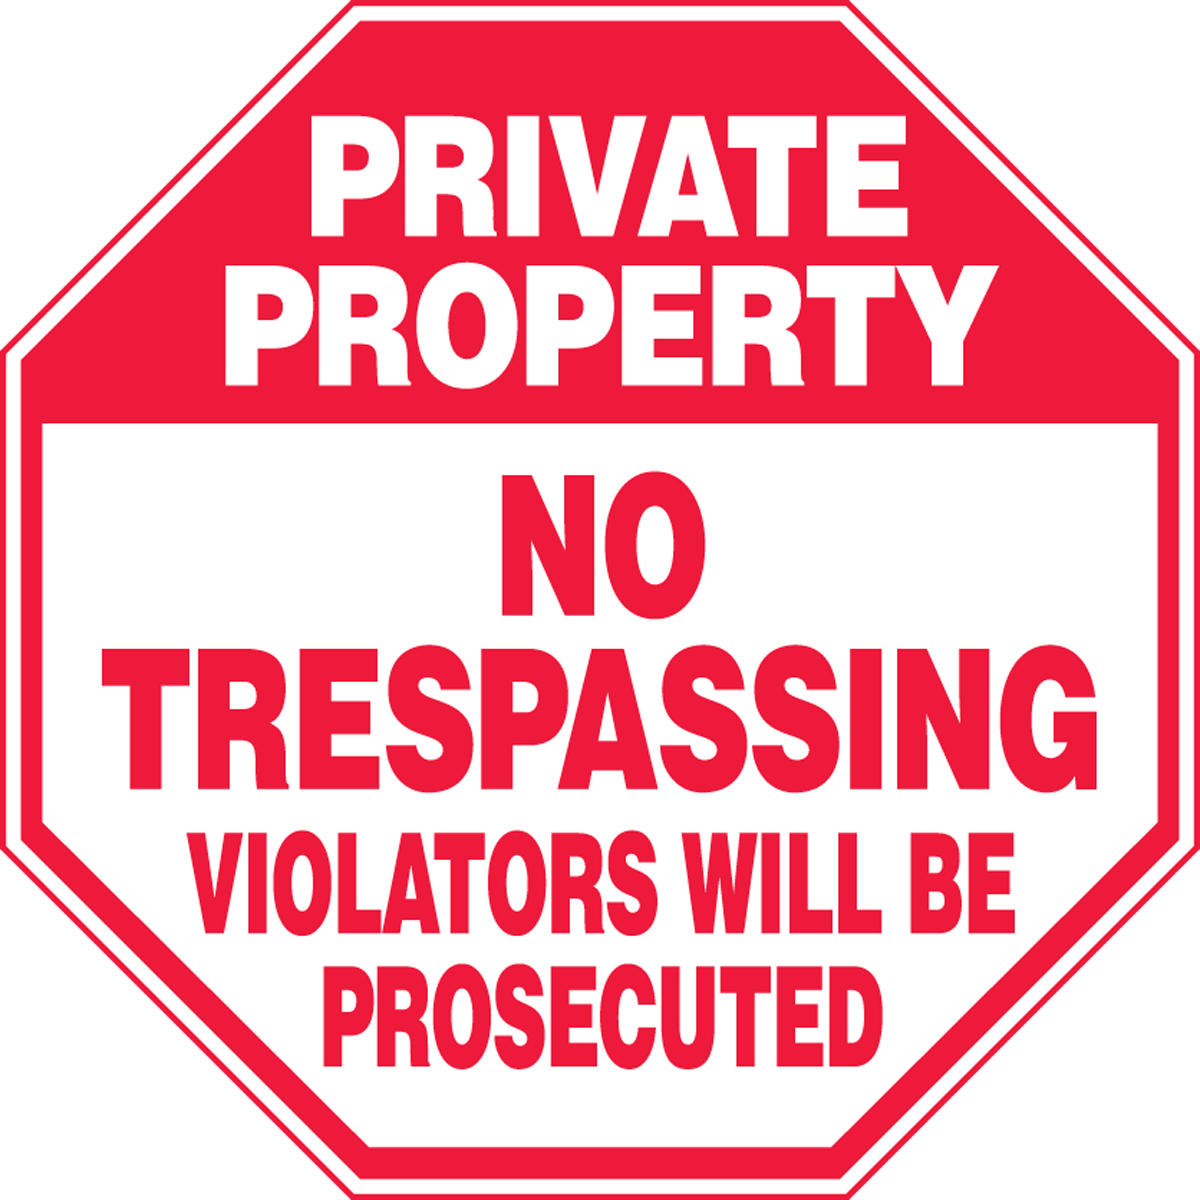 Accu-Shield 10 x 14 Inches MATR900XP AccuformNo Trespassing Violators Will Be Prosecuted Safety Sign 